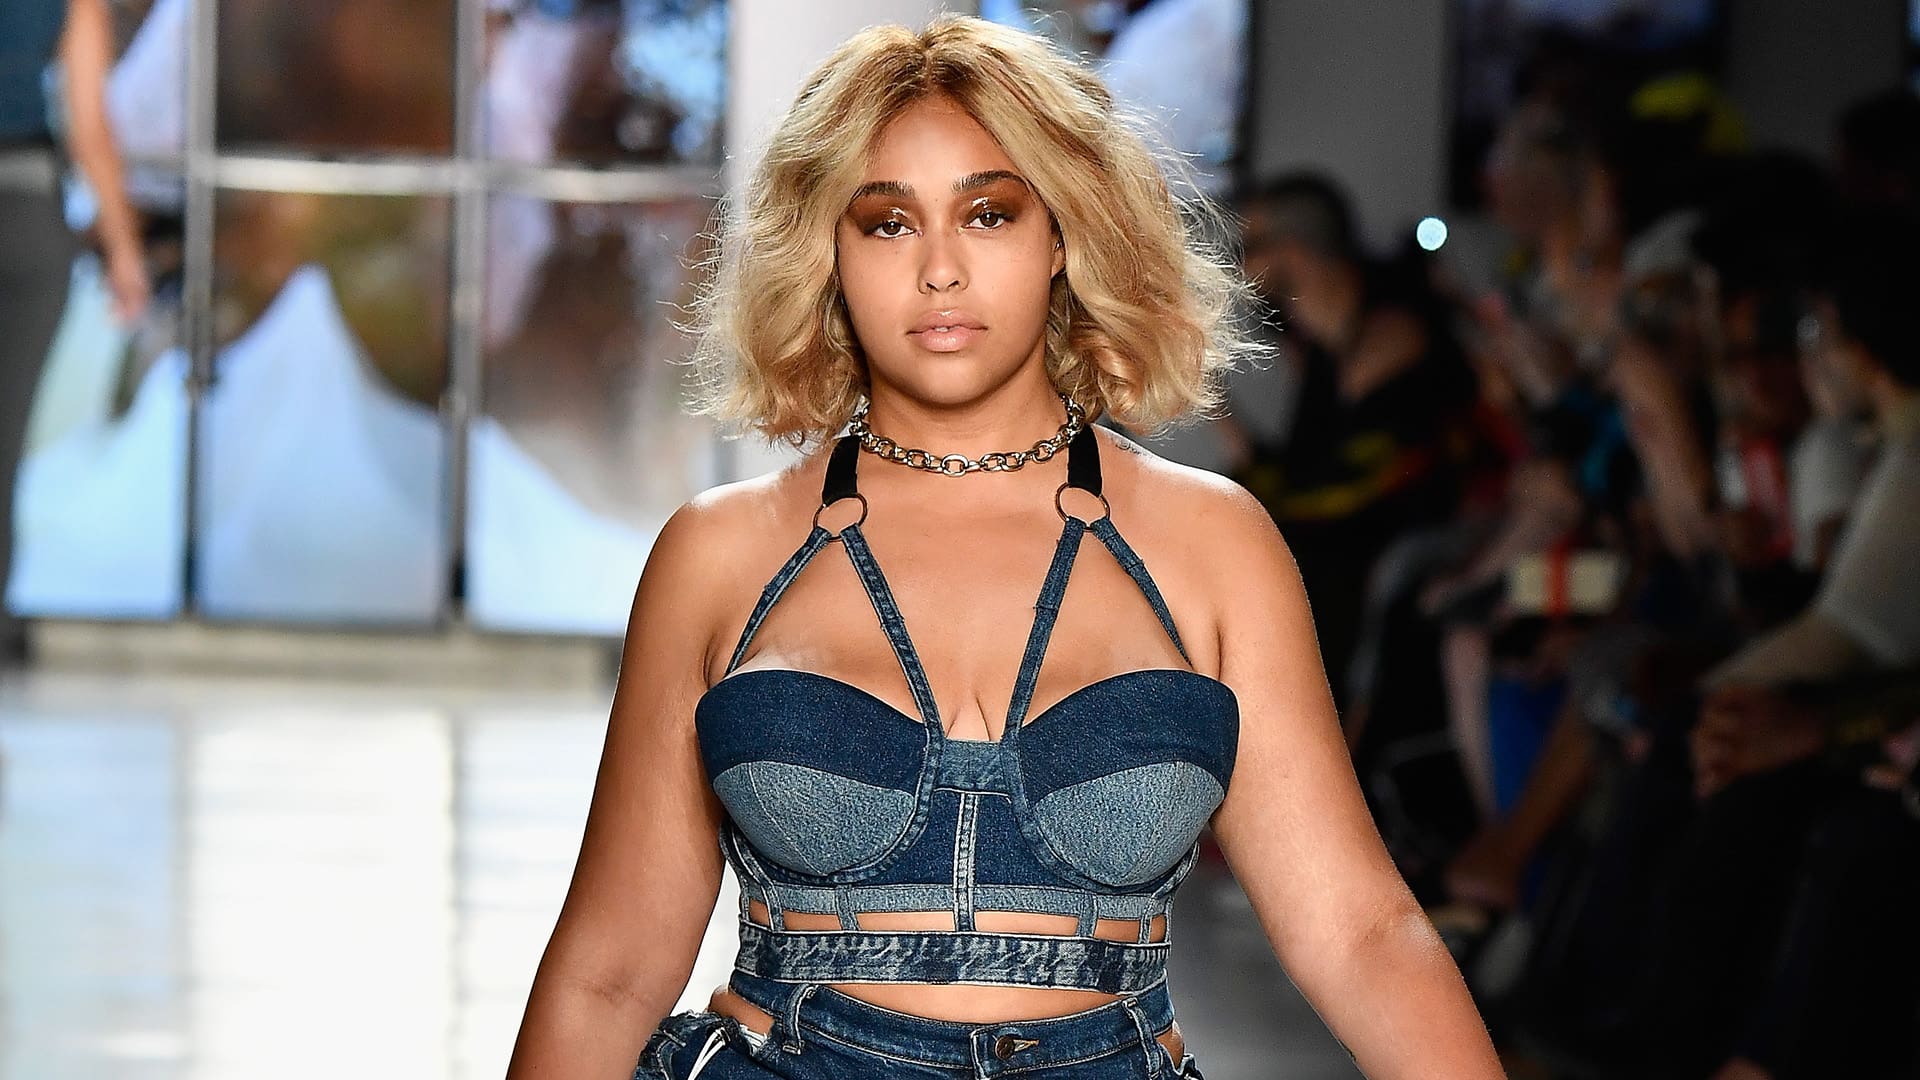 Jordyn Woods Announces A Hilarious Comedy On BET - Check Out Her Message